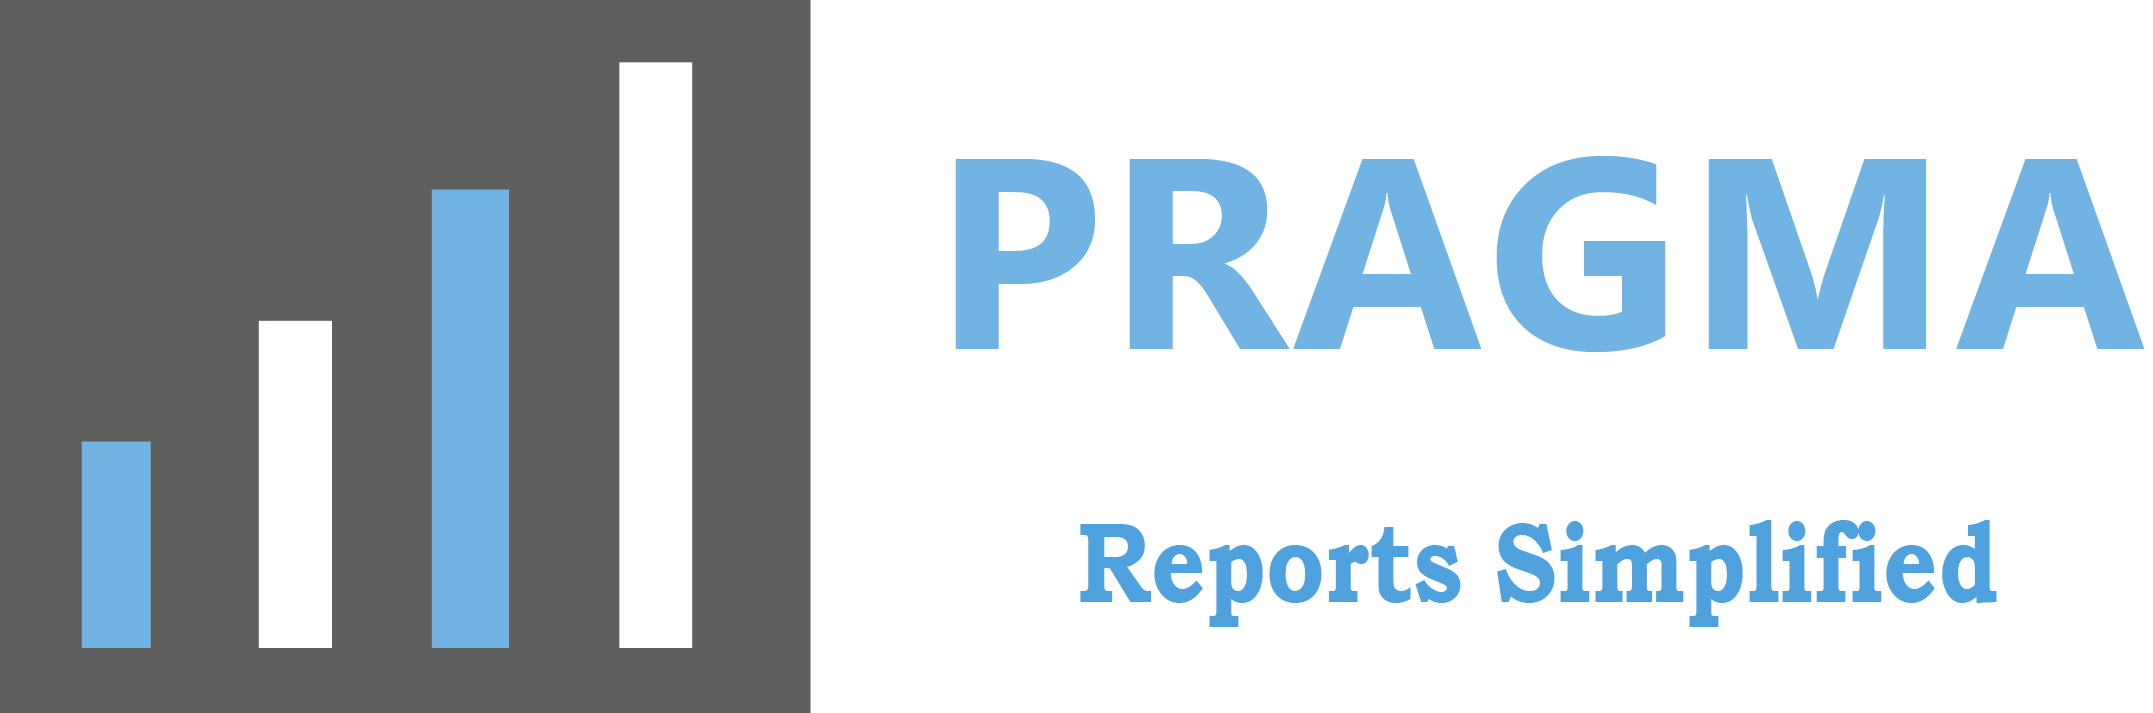 Pragma Market Research and Business Consulting Logo